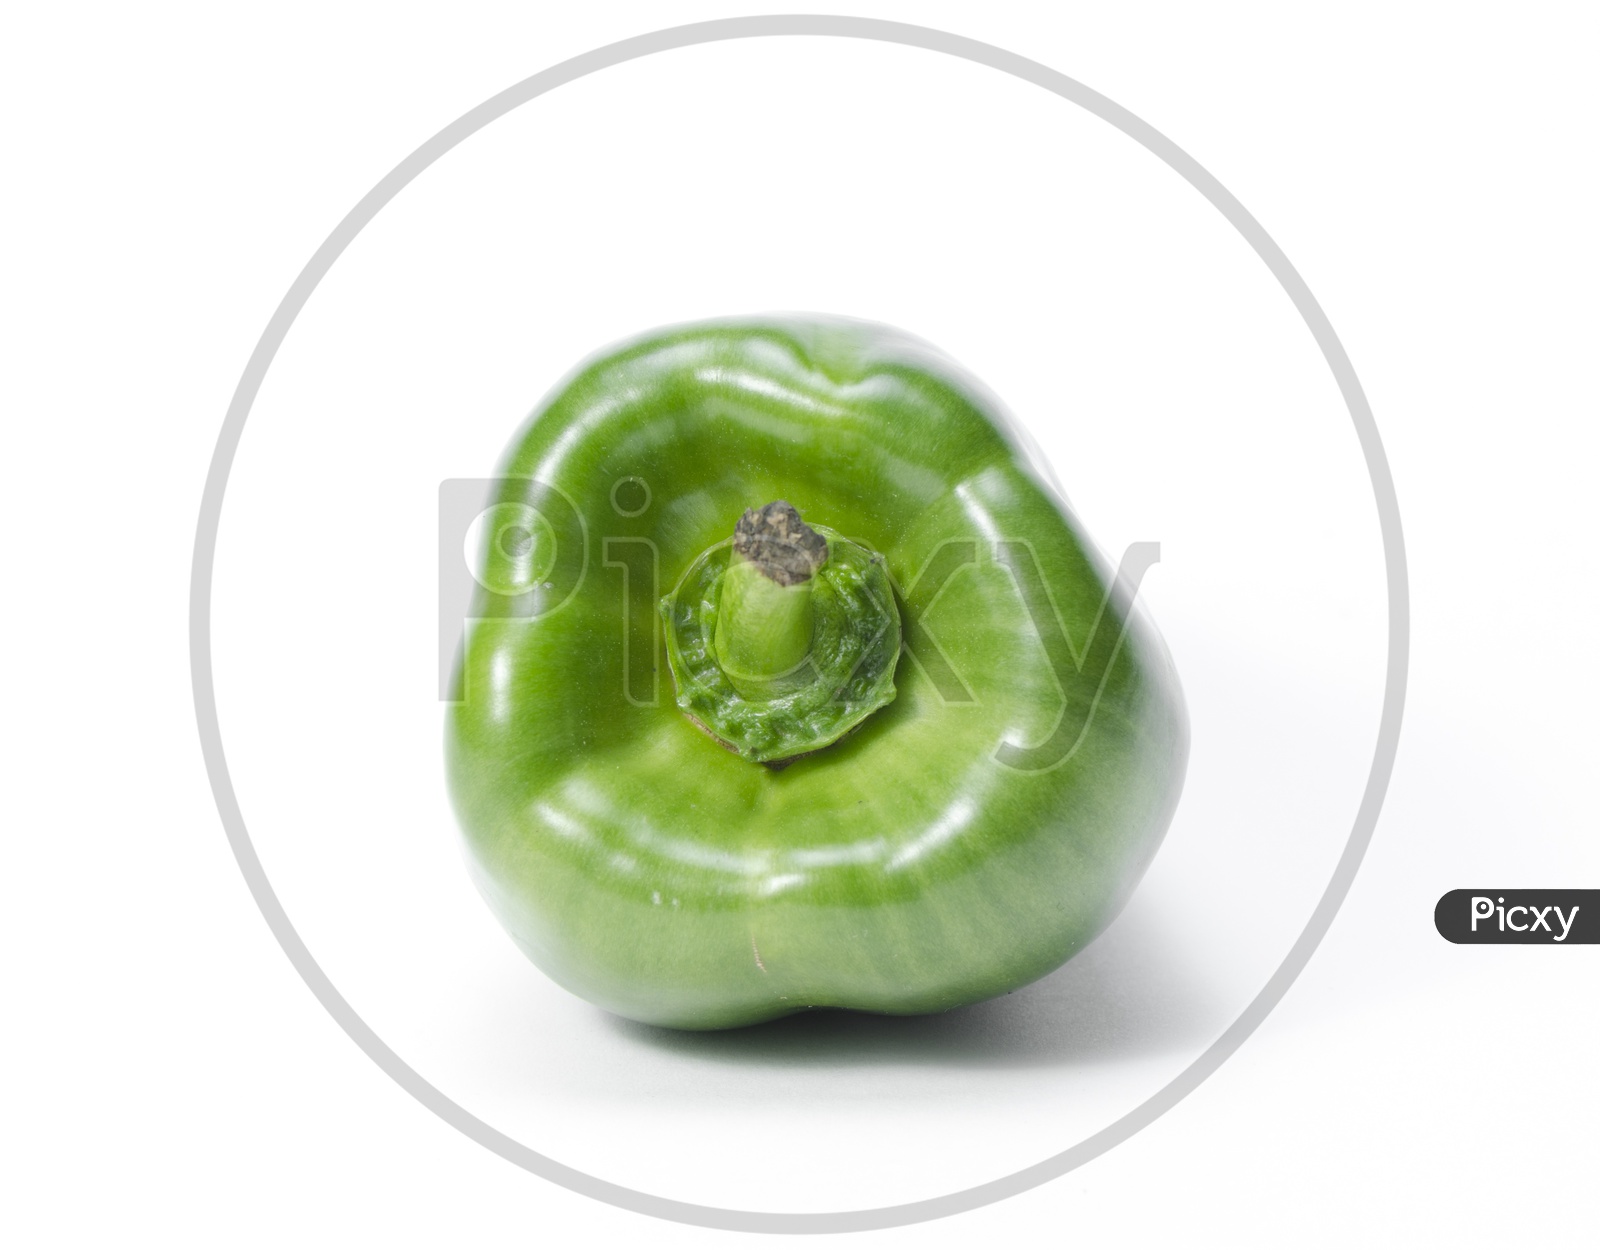 green capsicum or sweet pepper on white background